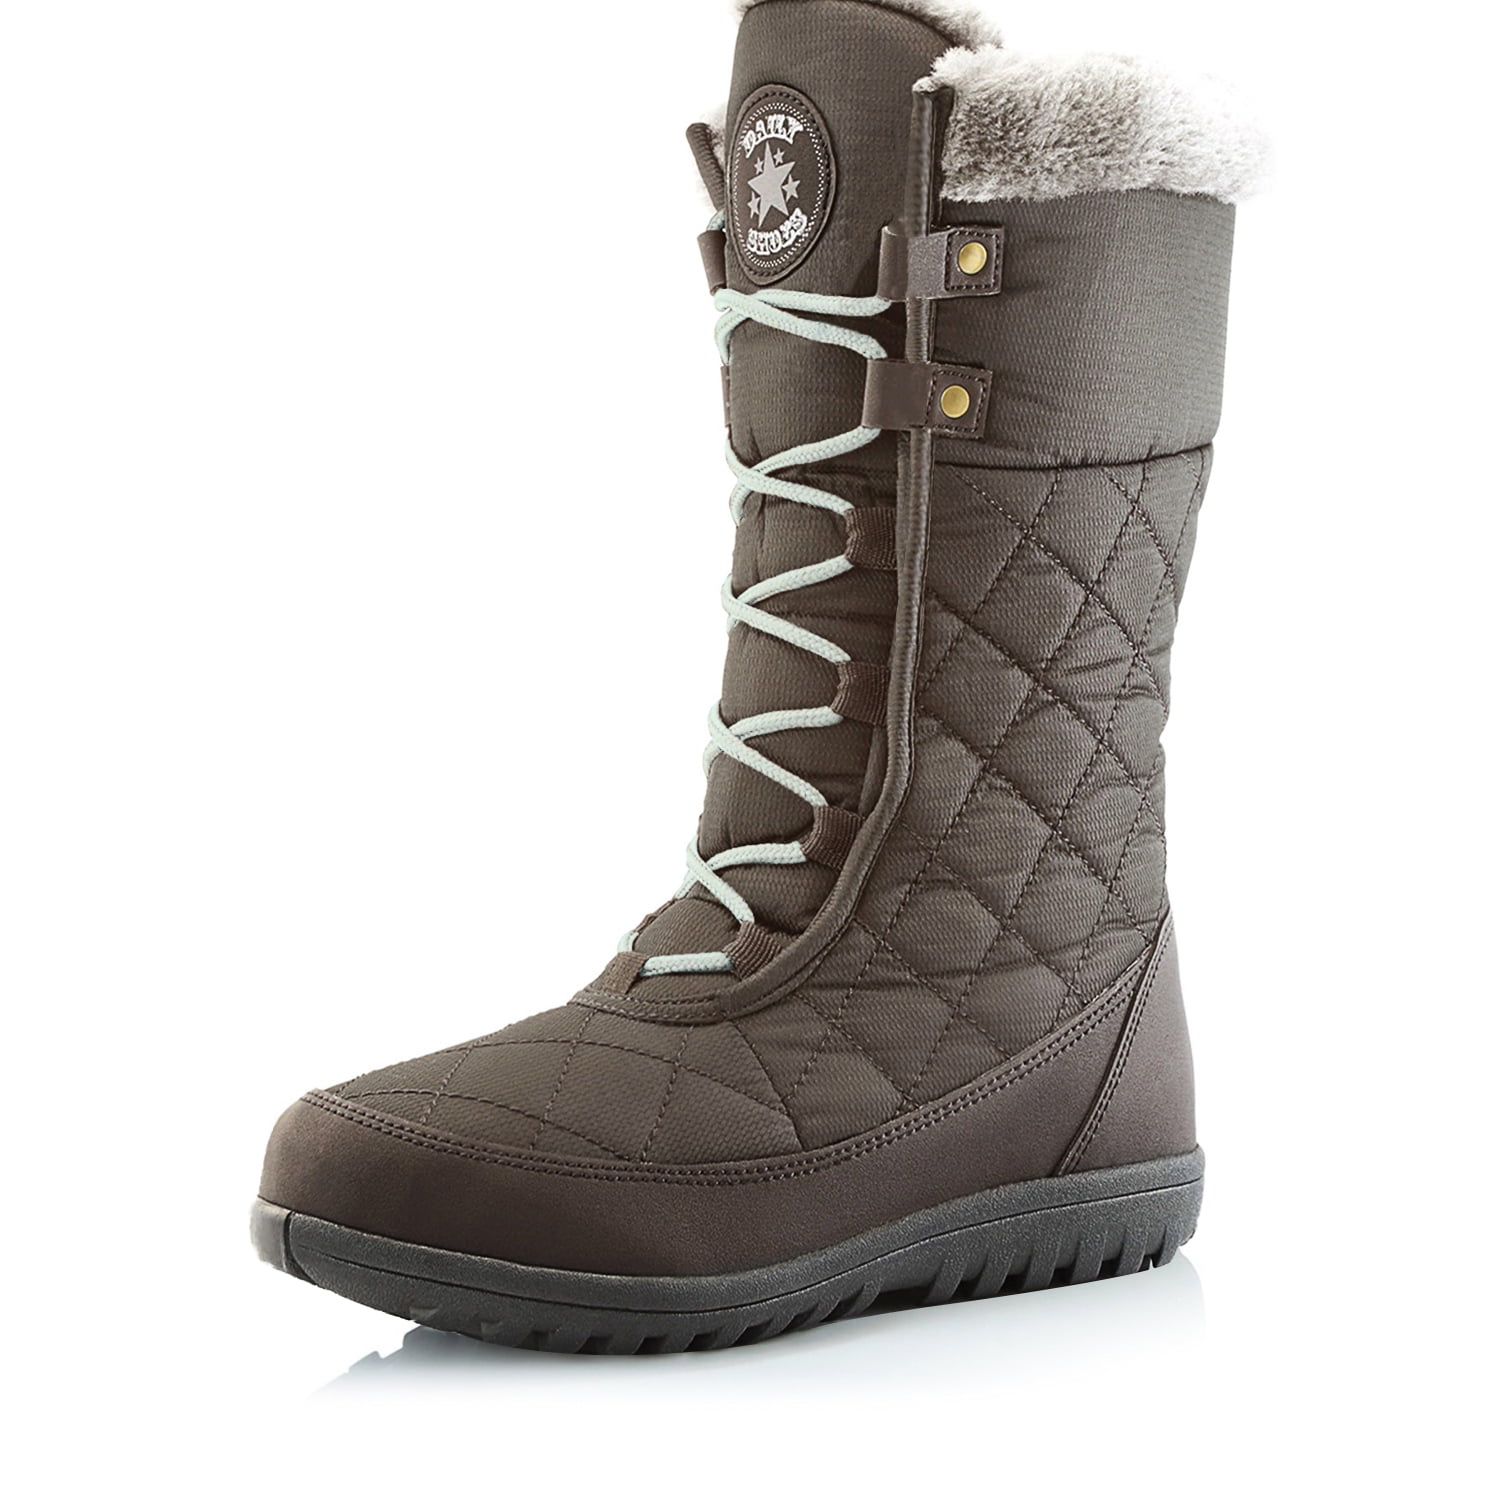 DailyShoes - DailyShoes Snow Boots Near 